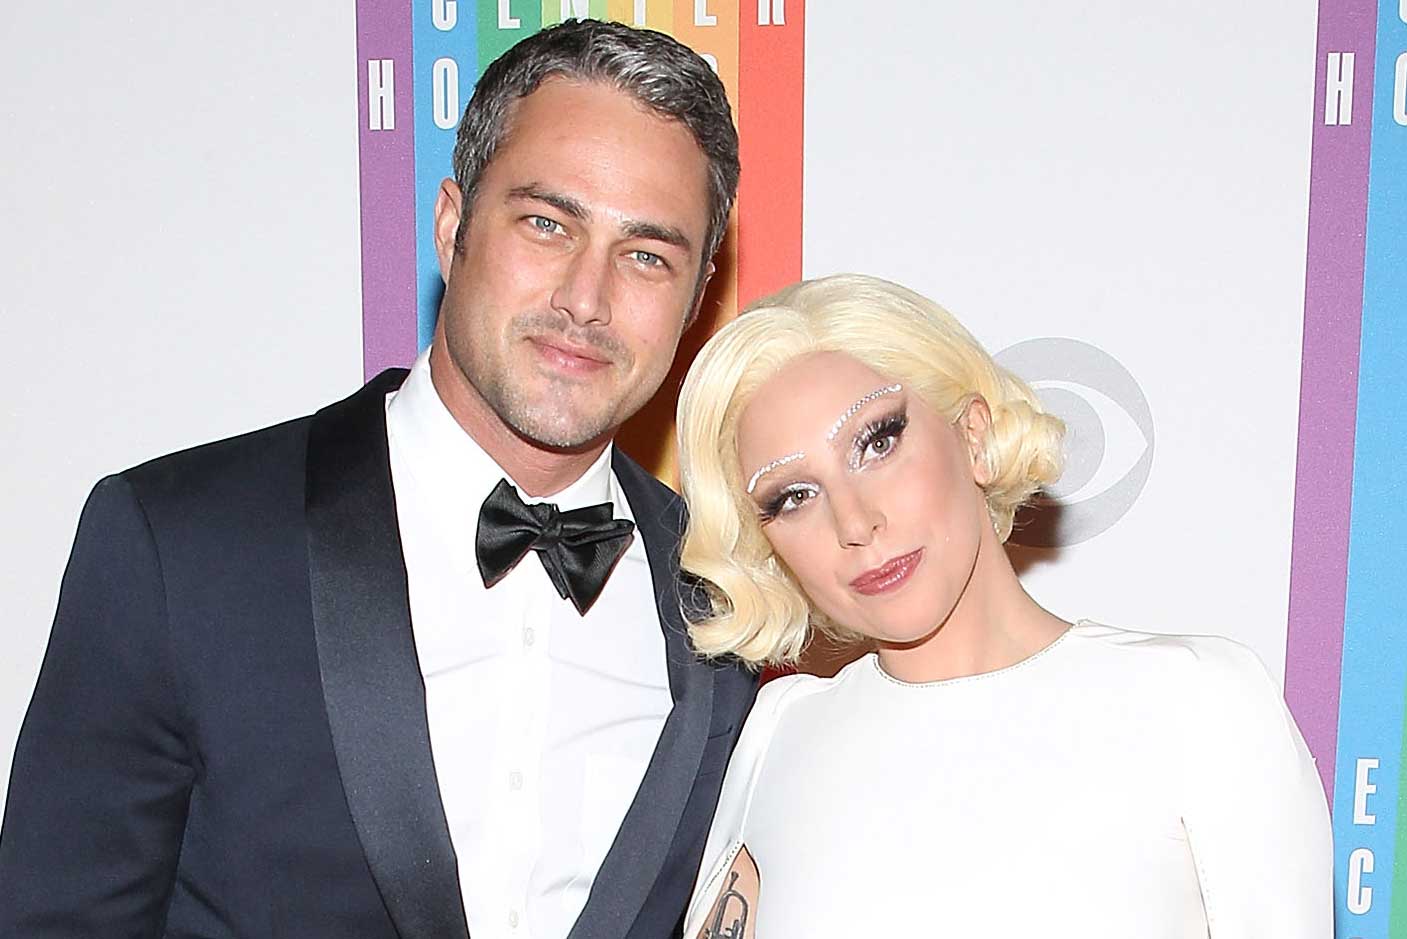 Taylor Kinney and Lady Gaga in 2014. (Paul Morigi&mdash;WireImage/Getty Images)